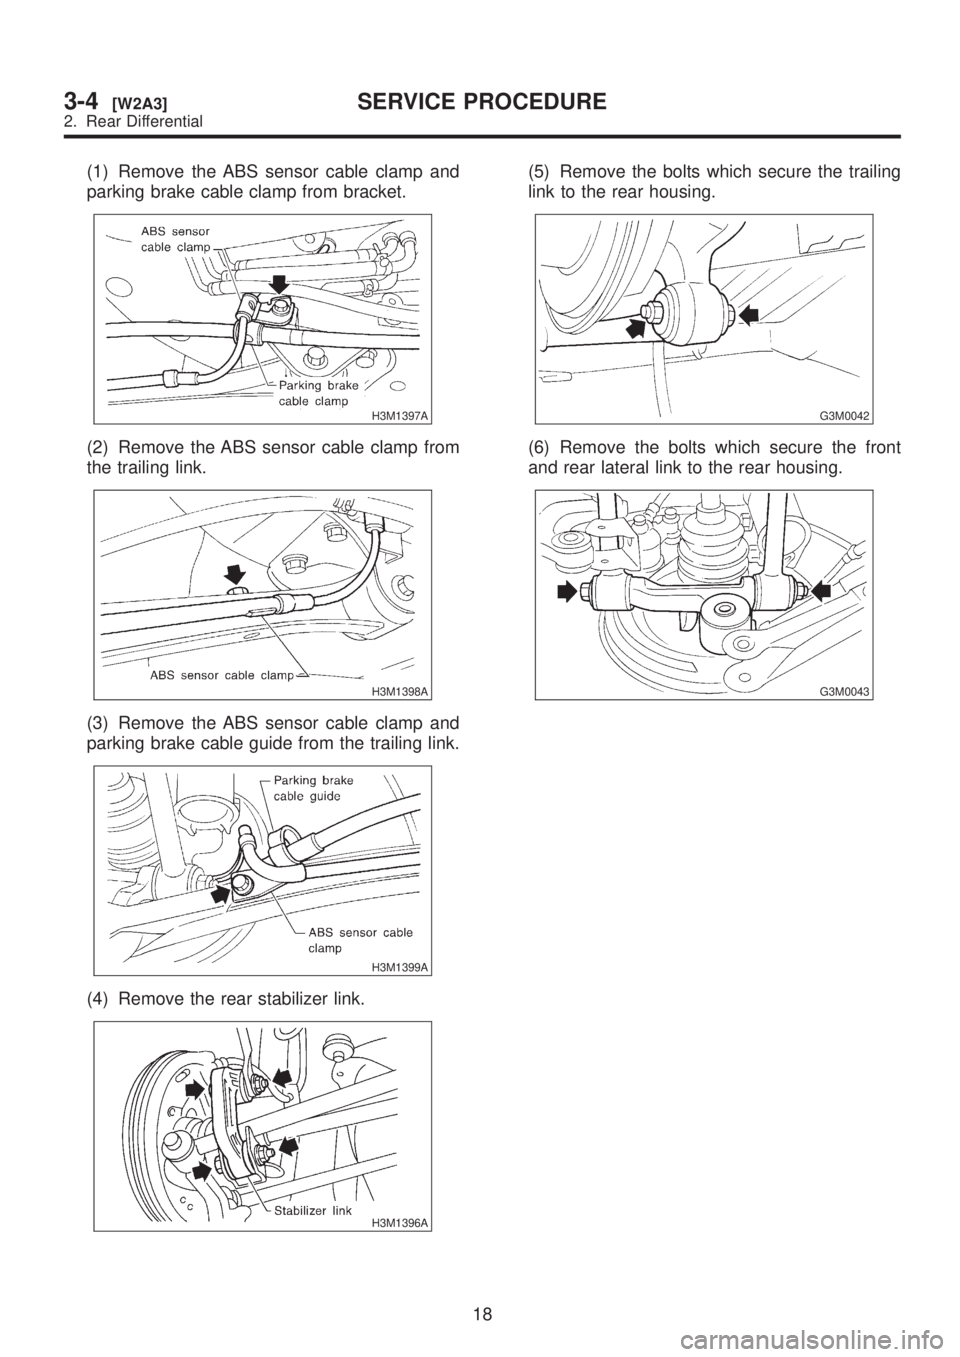 SUBARU LEGACY 1999  Service Repair Manual (1) Remove the ABS sensor cable clamp and
parking brake cable clamp from bracket.
H3M1397A
(2) Remove the ABS sensor cable clamp from
the trailing link.
H3M1398A
(3) Remove the ABS sensor cable clamp 